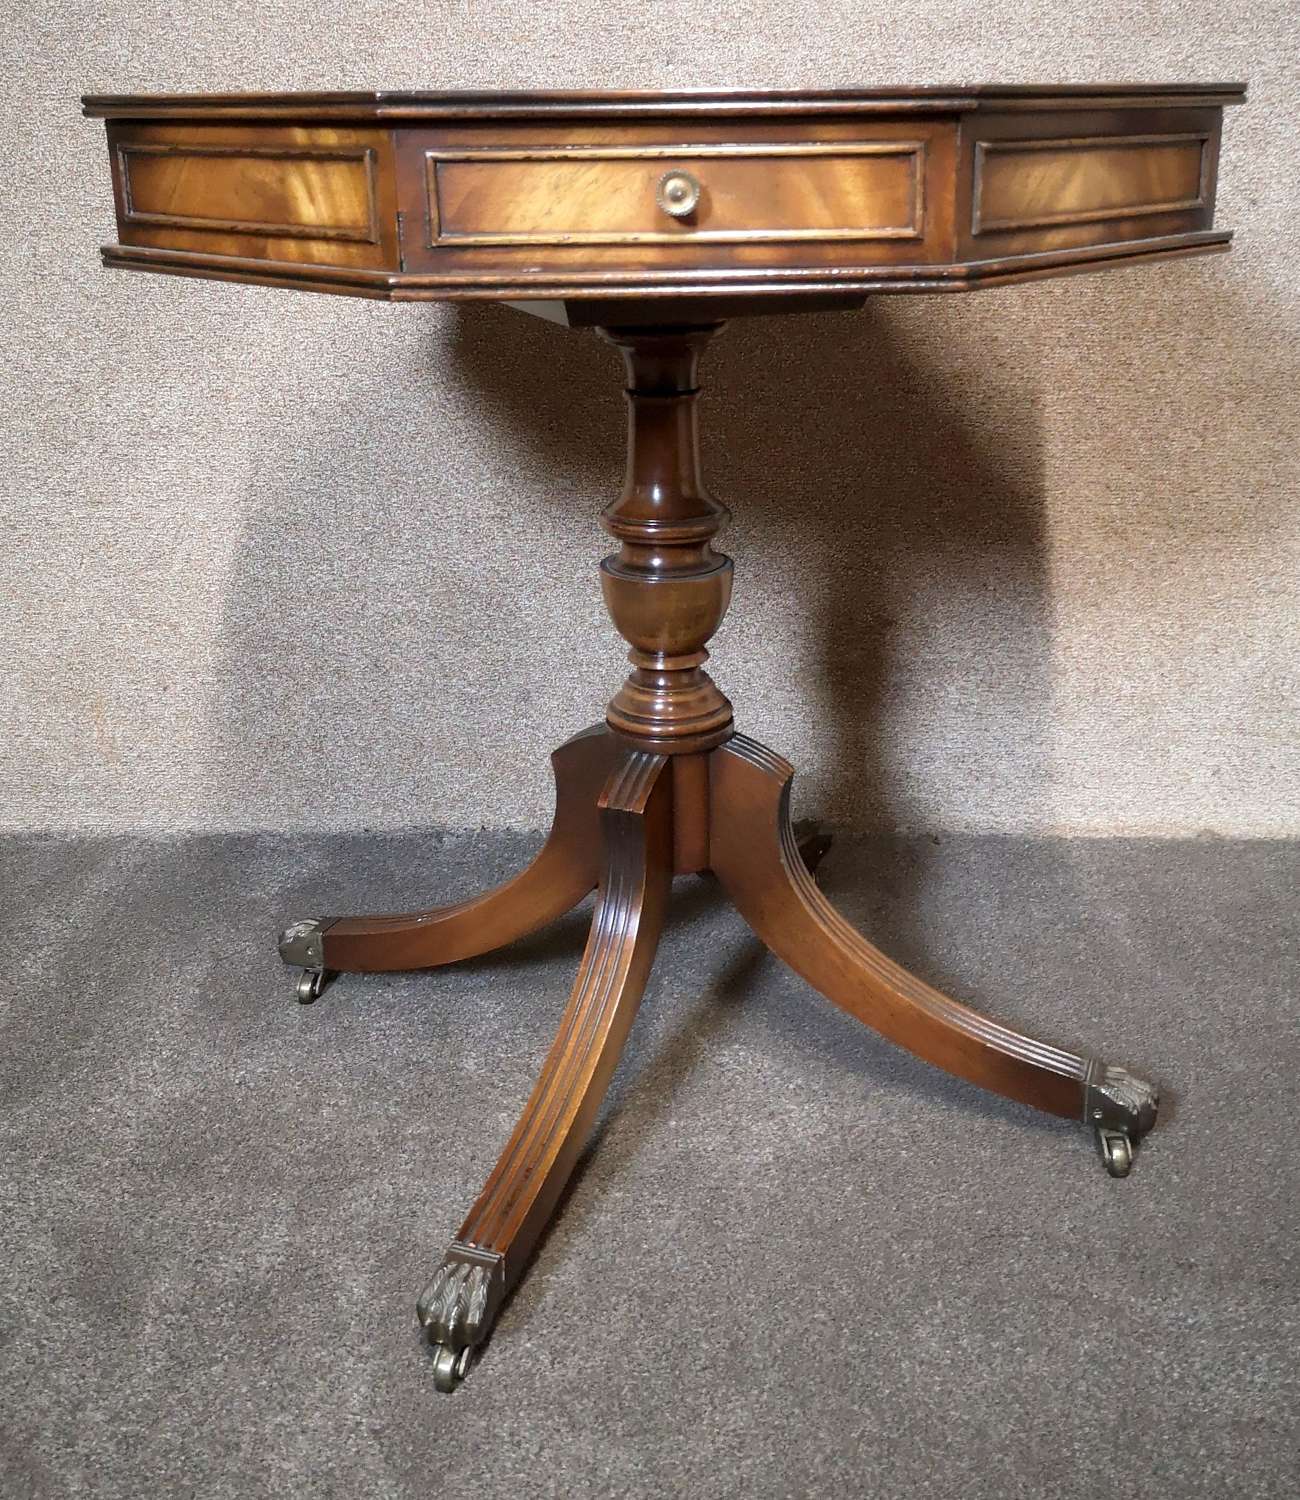 Mahogany Octagonal Revolving Drum Table by Reprodux Bevan Funnell